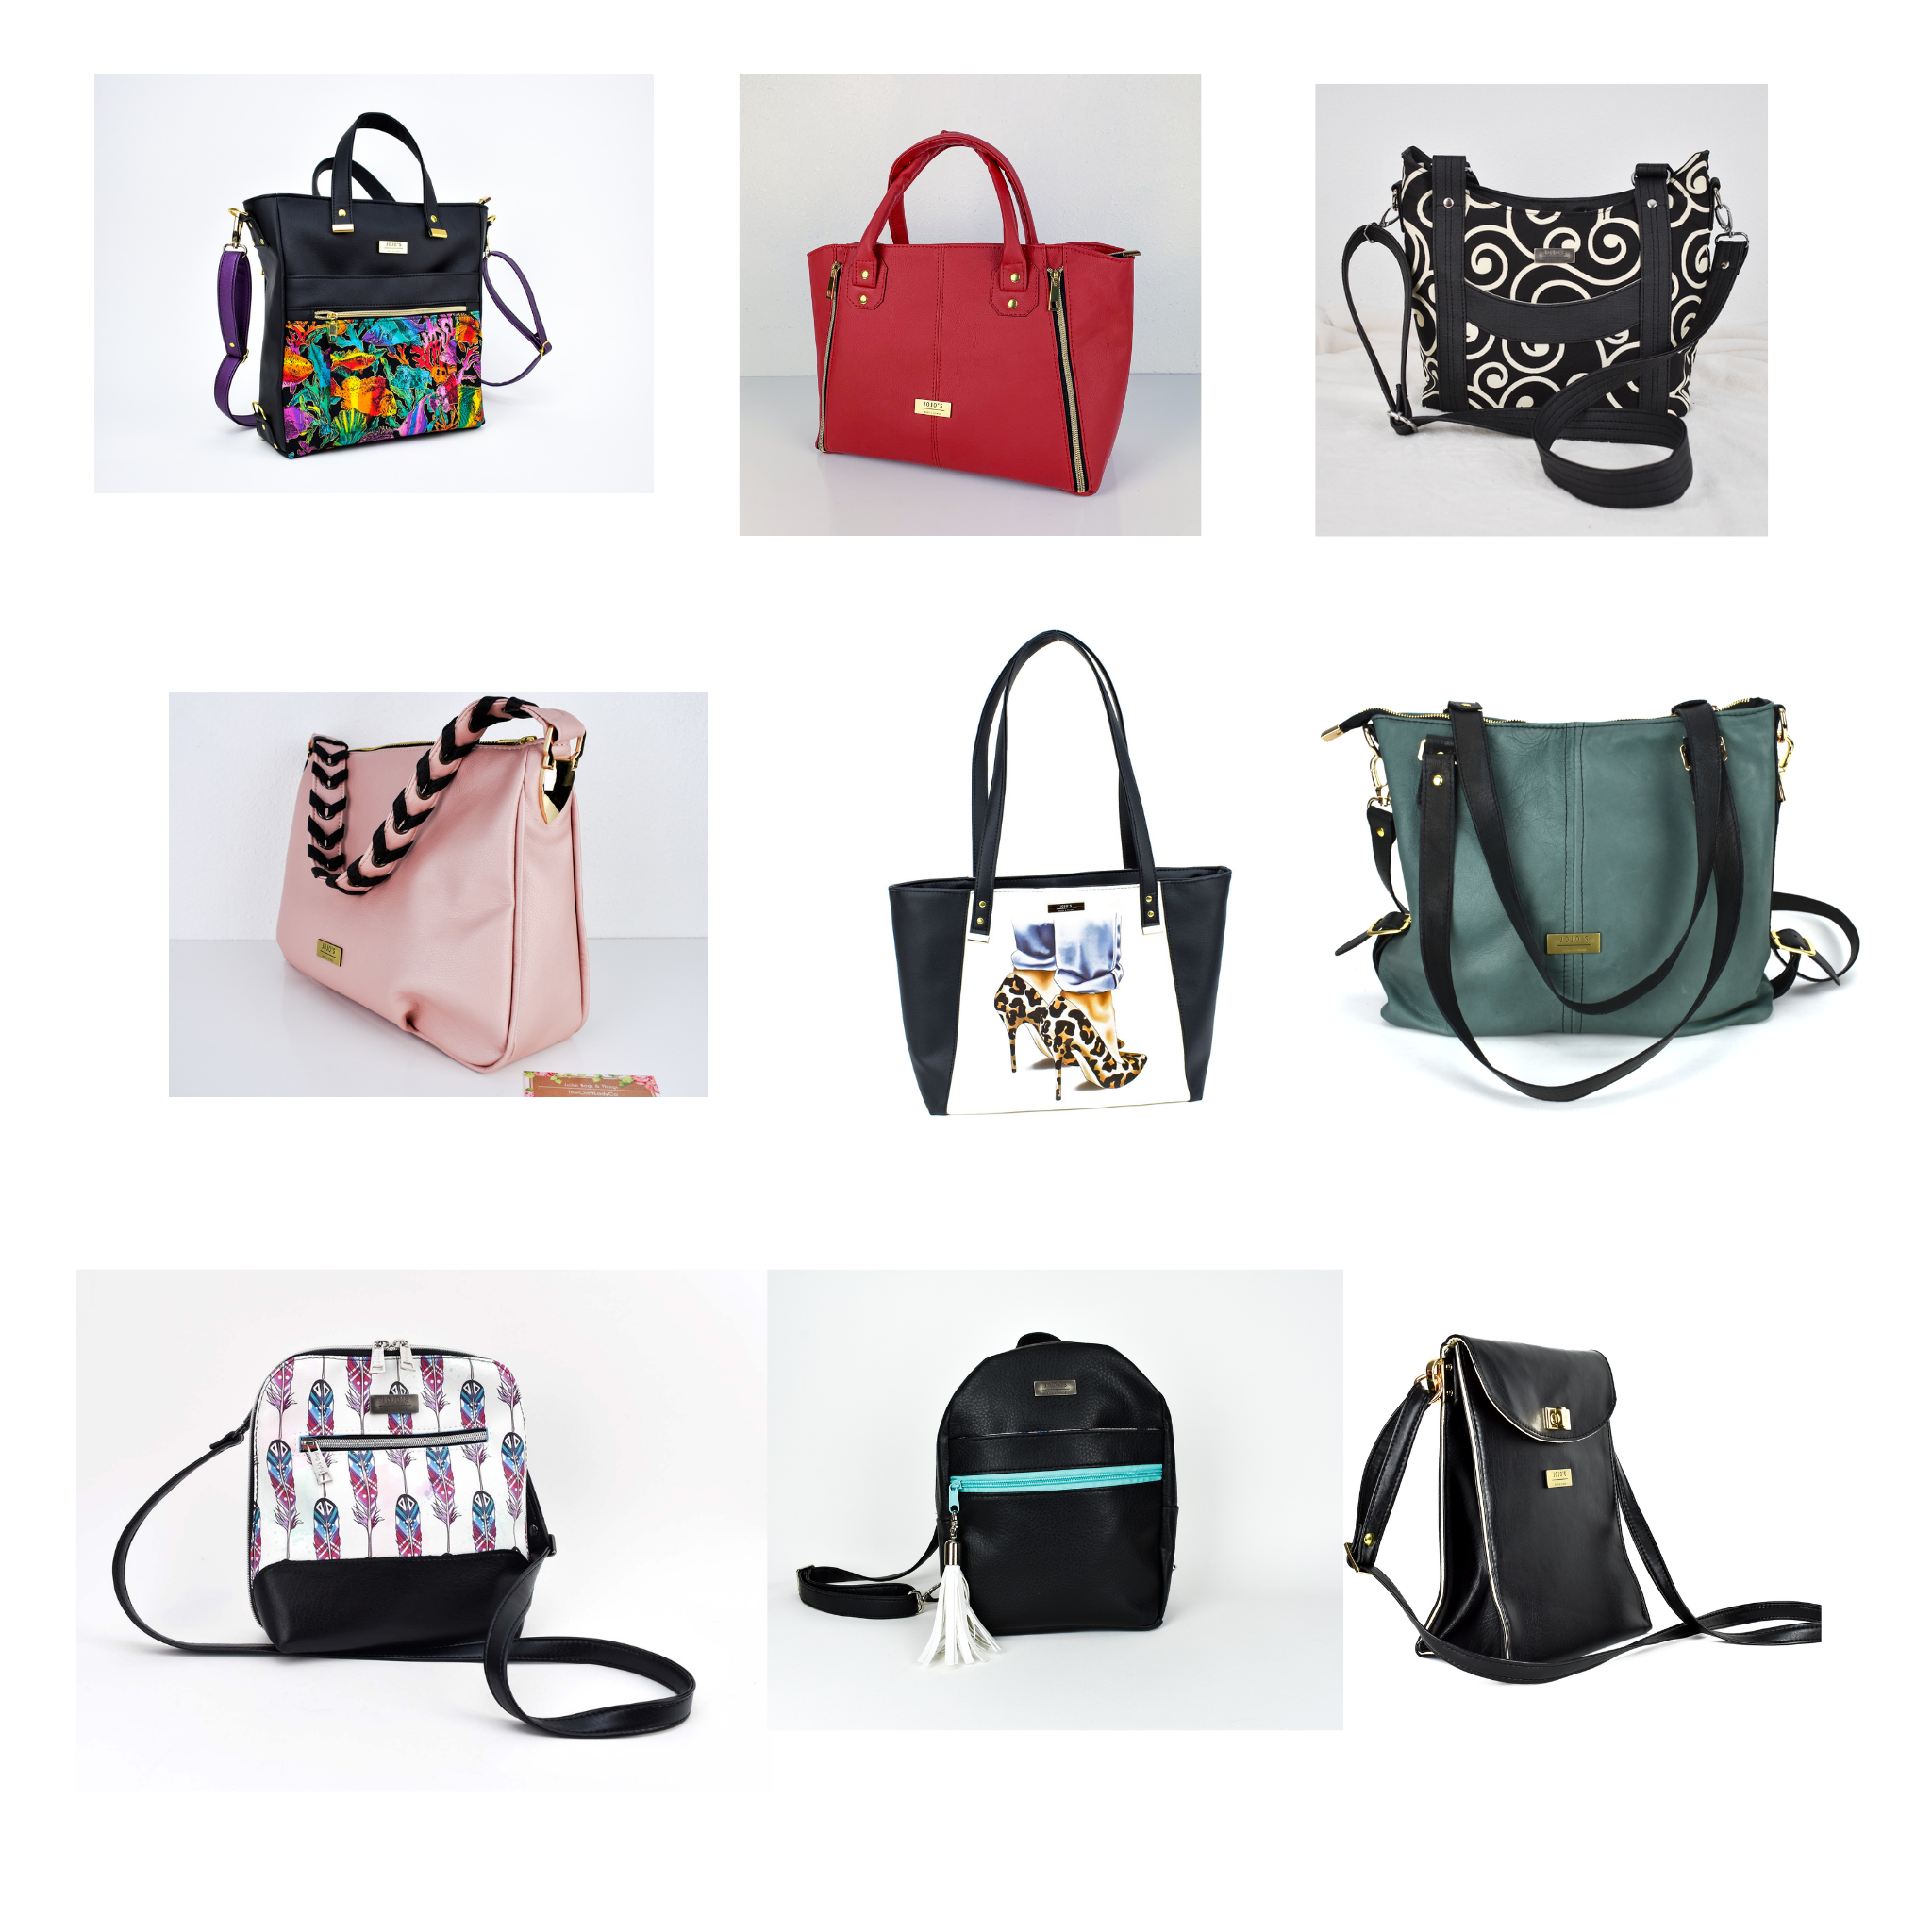 Check out our run-way inspired fashion handbags, designer look alike purses,  practical shopping tote, shoulder bags, sling bags, satchel bags,  accessories for women! 20% OFF or Buy One Get One Free! Free